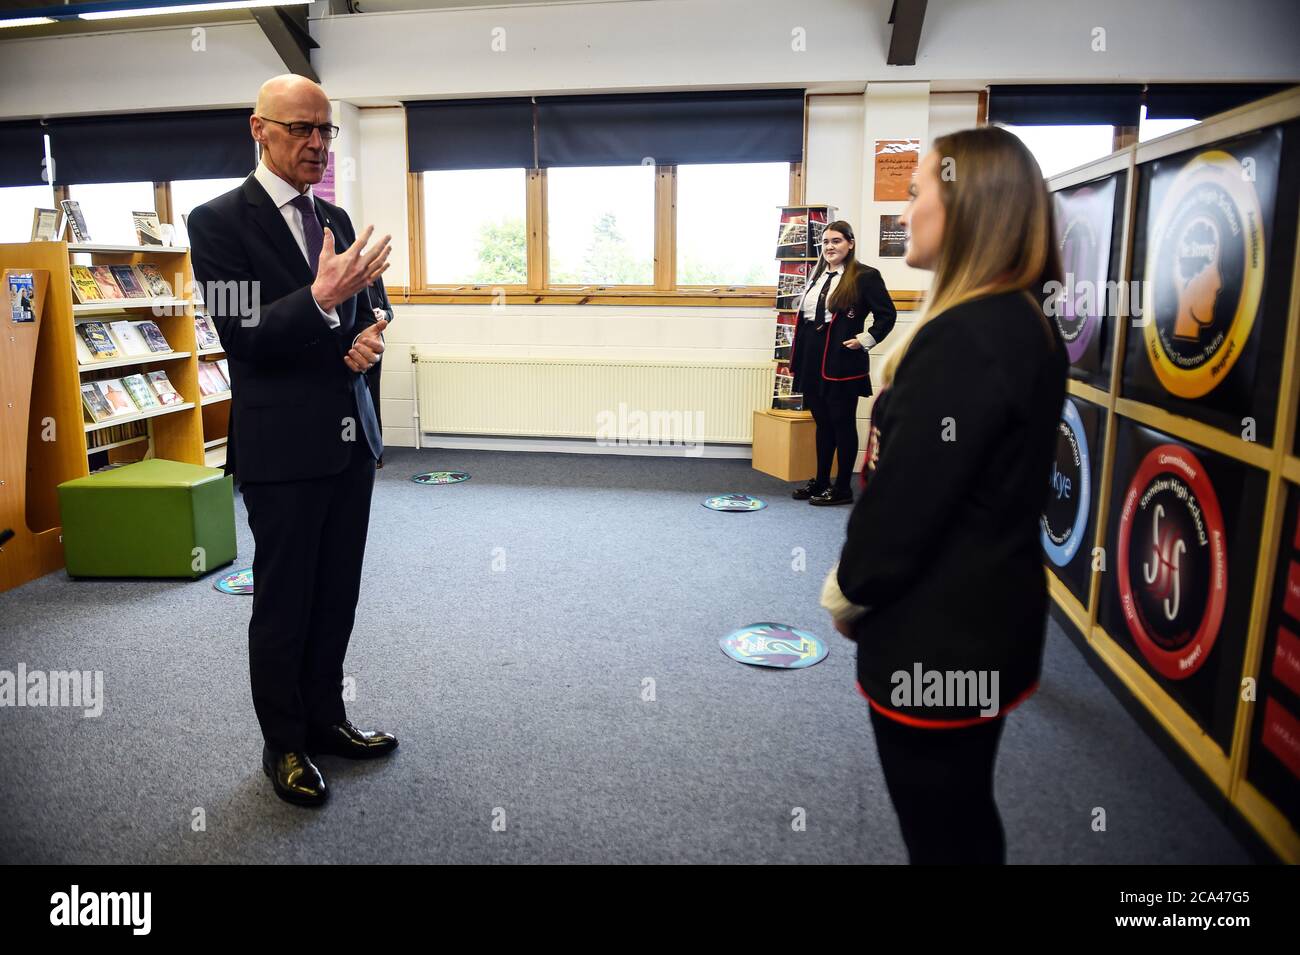 Deputy First Minister of Scotland and Cabinet Secretary for Education and Skills John Swinney speaks with pupils during a visit to Stonlelaw High School in Rutherglen, Glasgow, on the day pupils are finding out their Scottish Qualifications Authority (SQA) grades. Stock Photo